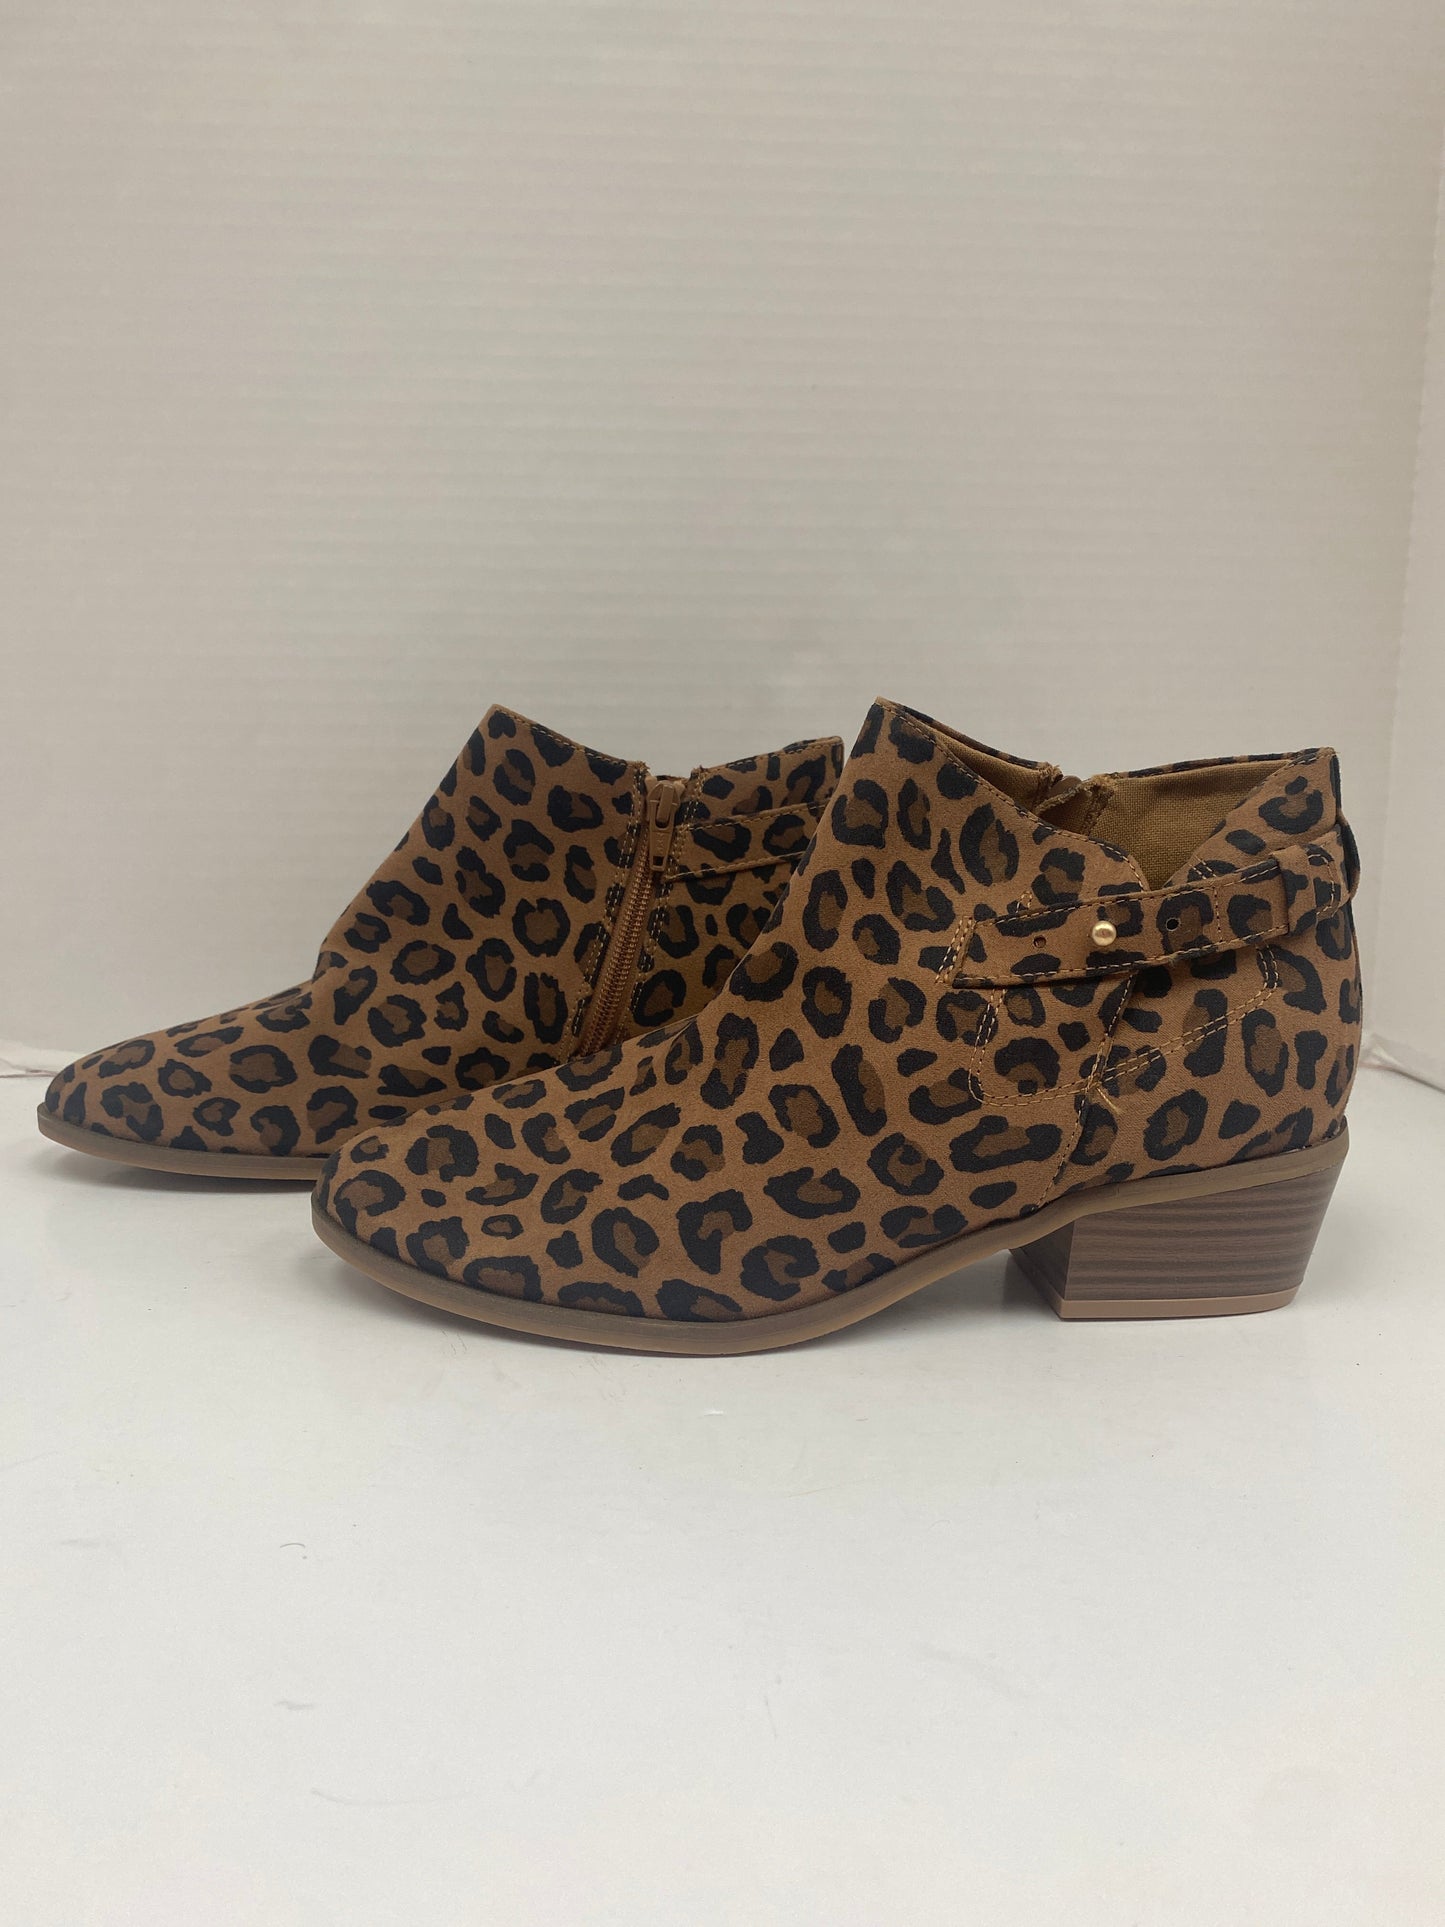 Animal Print Boots Ankle Heels Old Navy, Size 8